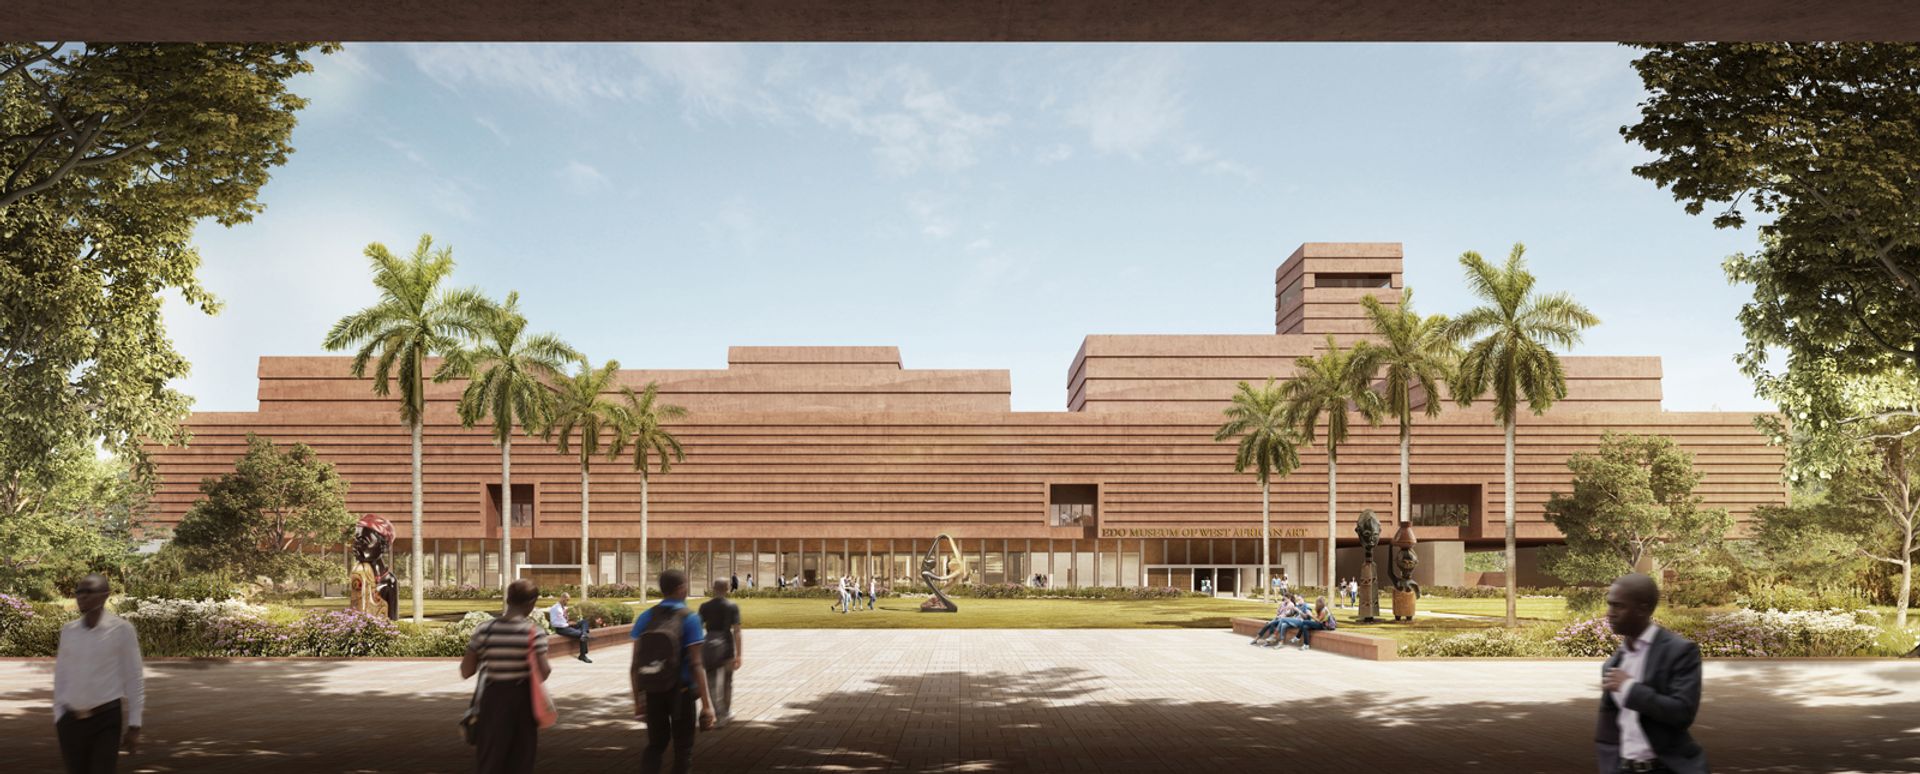 The main entrance and courtyard garden of the planned Edo Museum of West African Art © Adjaye Associates